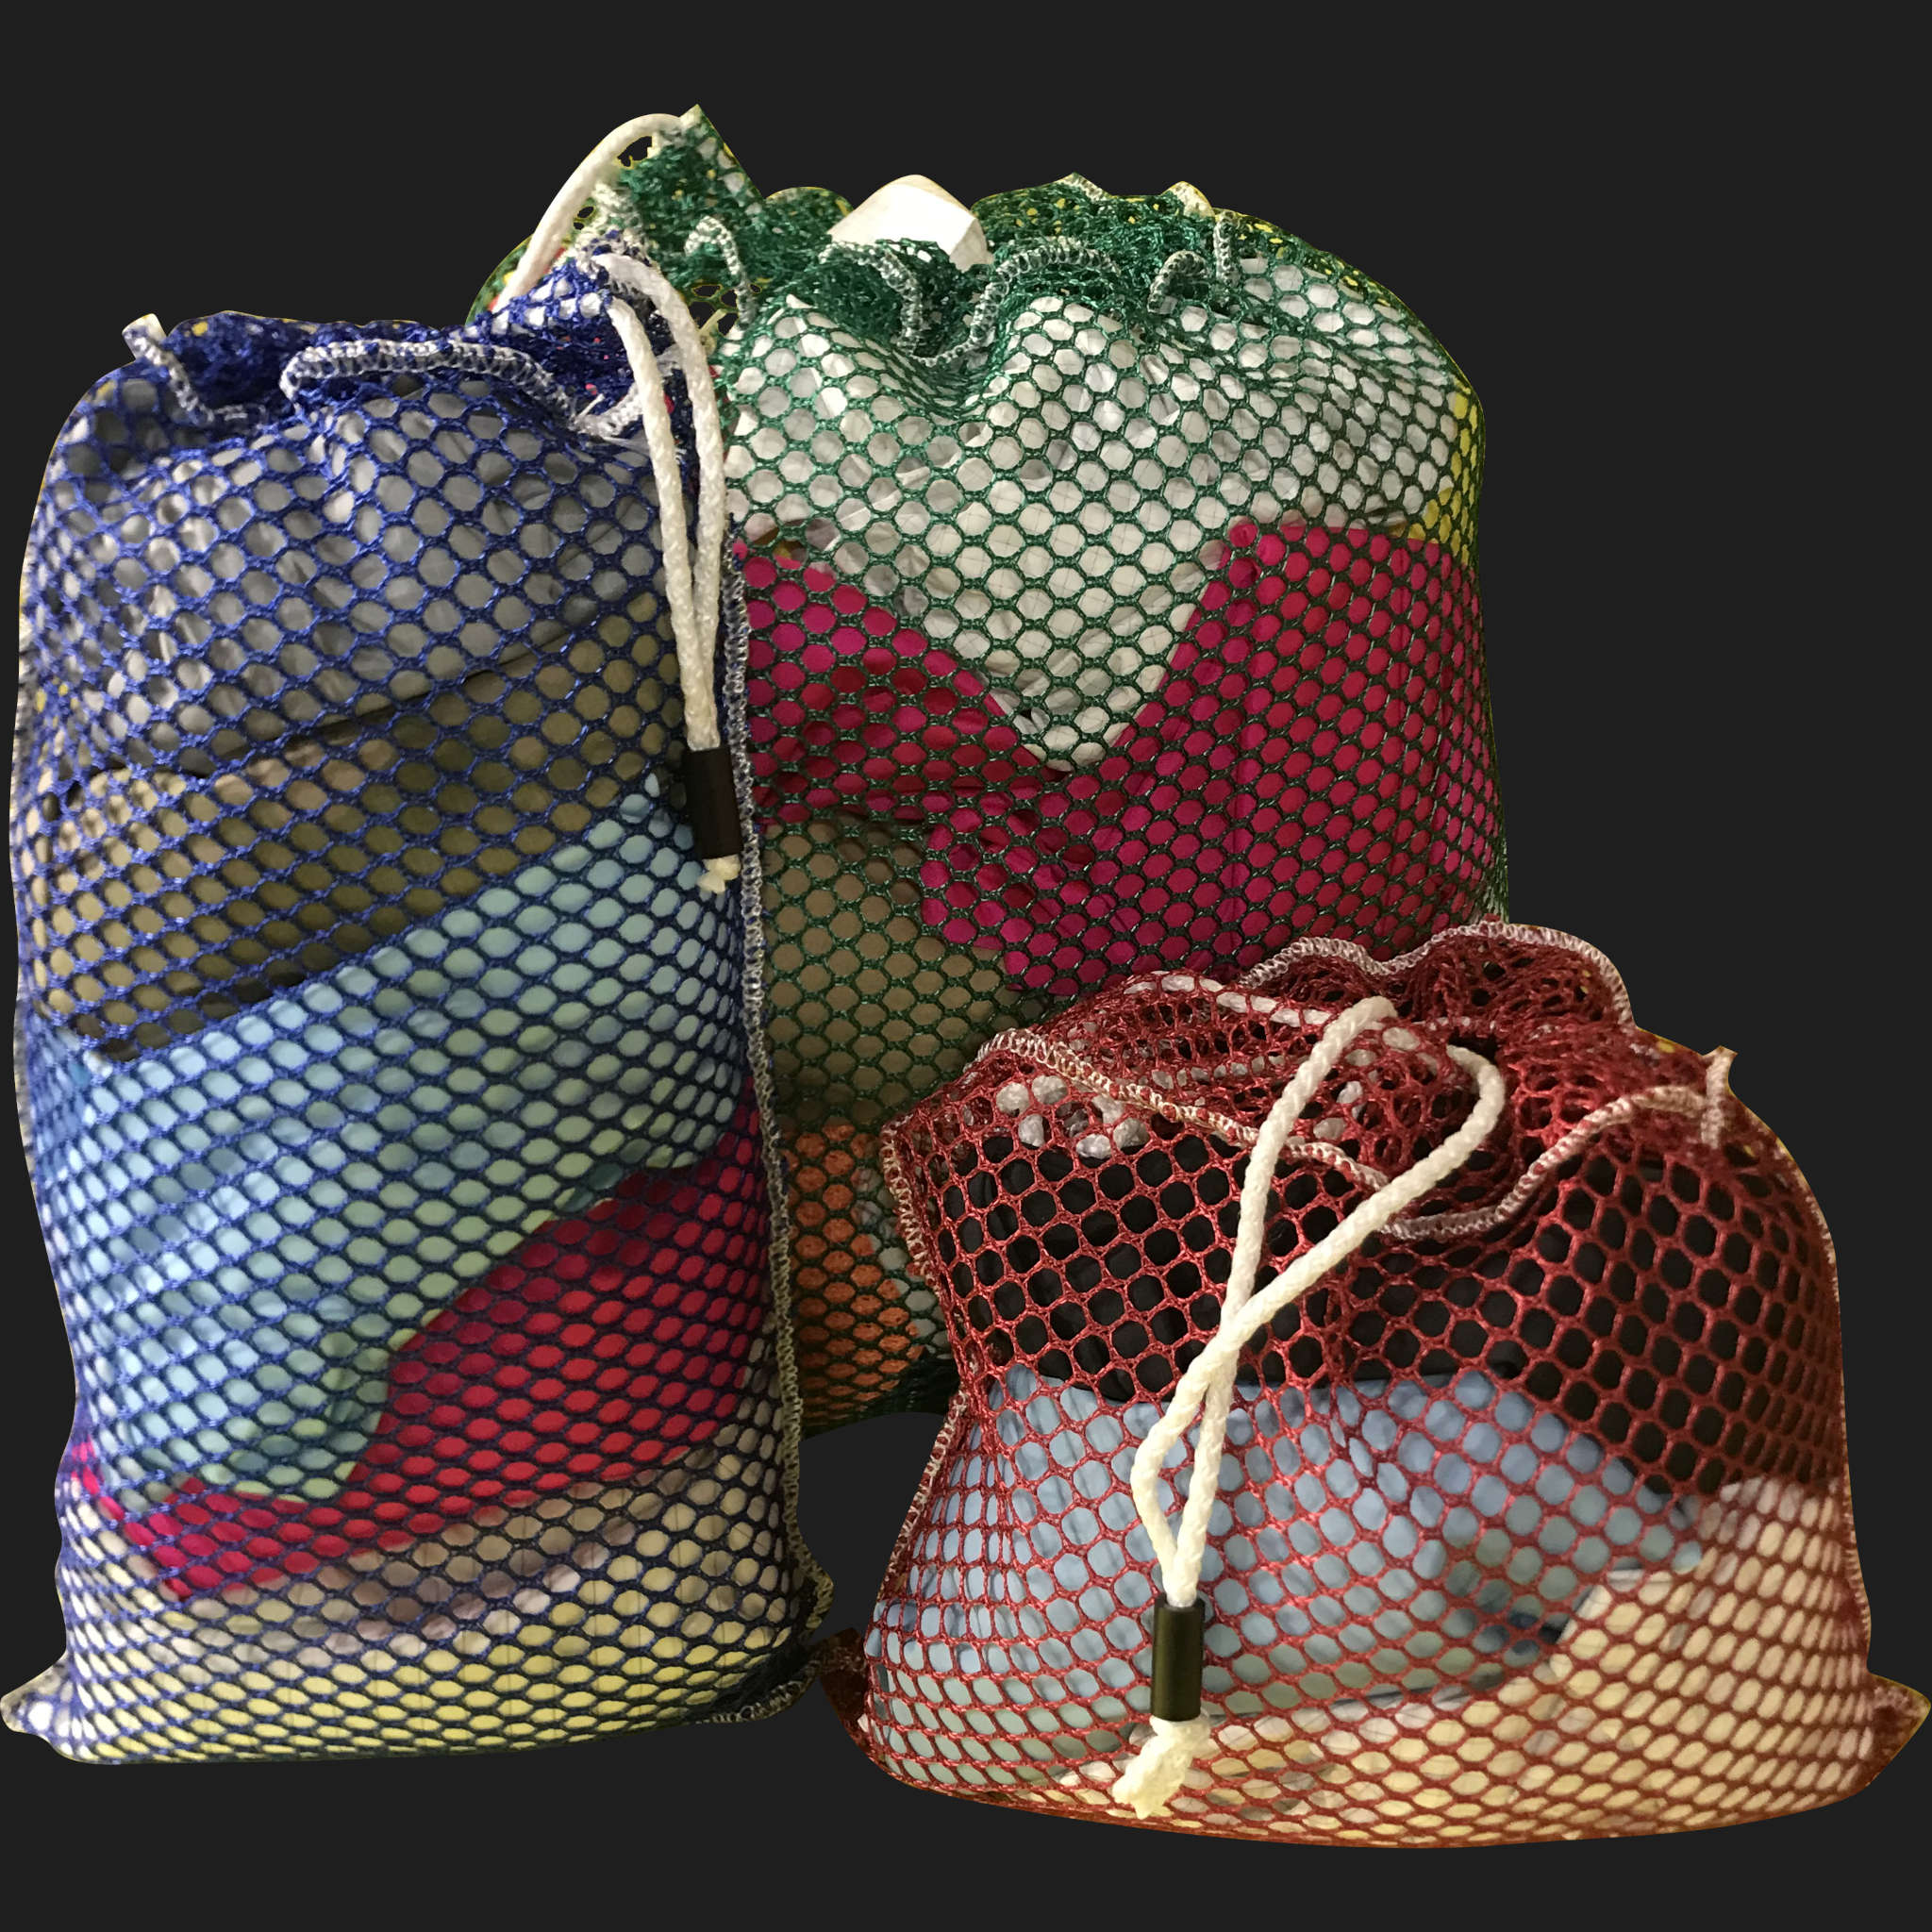 44" x 56" Customized Mesh-Net-Laundry Bags Heavy Duty with Cord and barrellock closure